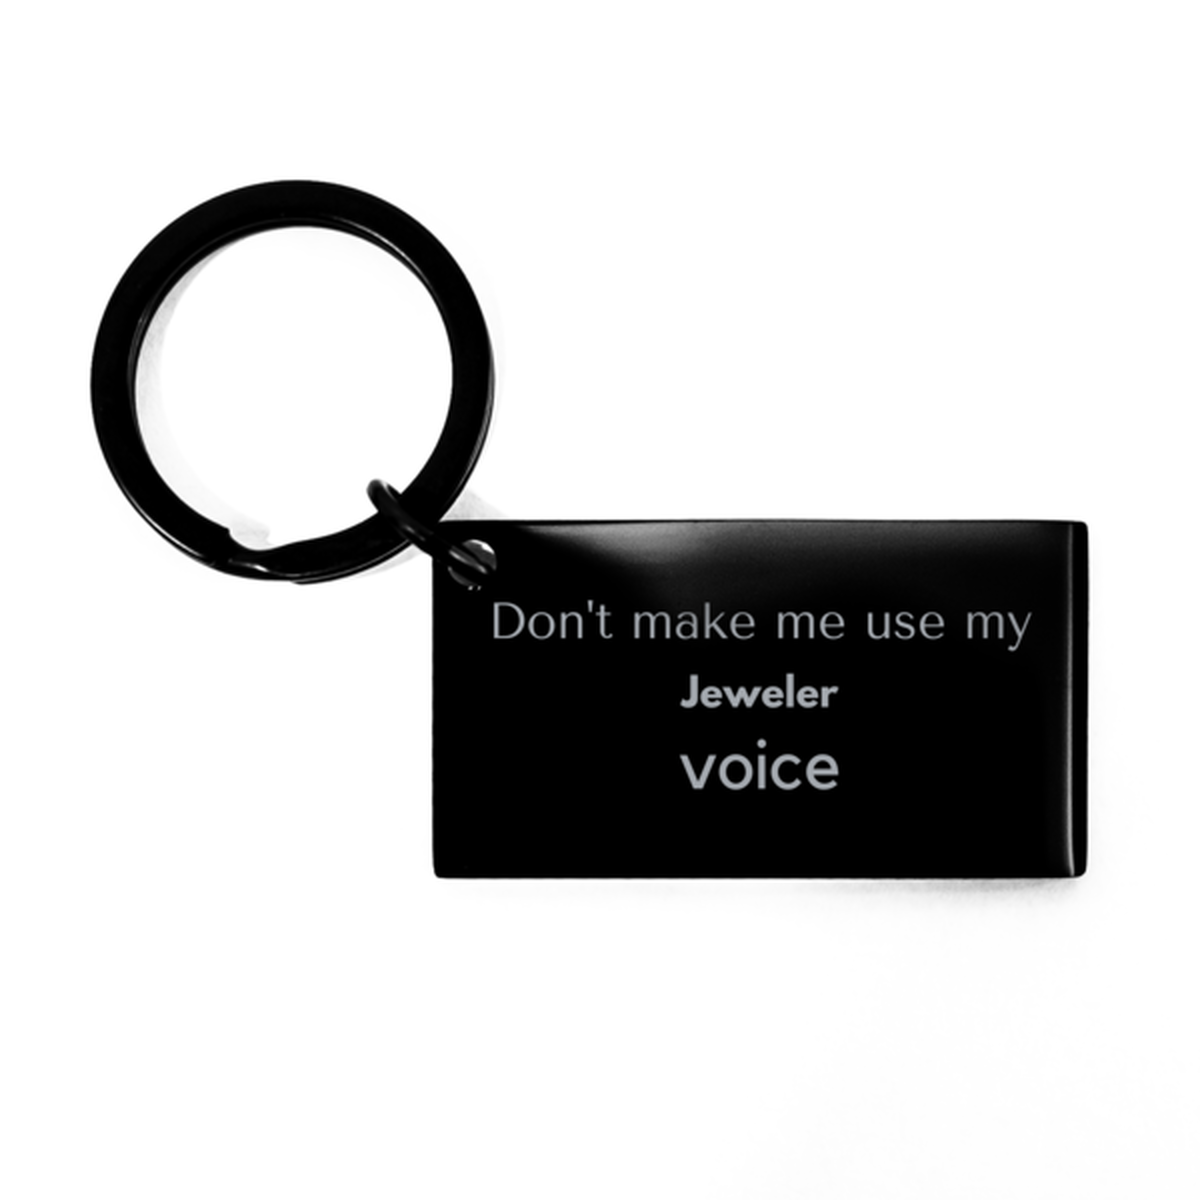 Don't make me use my Jeweler voice, Sarcasm Jeweler Gifts, Christmas Jeweler Keychain Birthday Unique Gifts For Jeweler Coworkers, Men, Women, Colleague, Friends